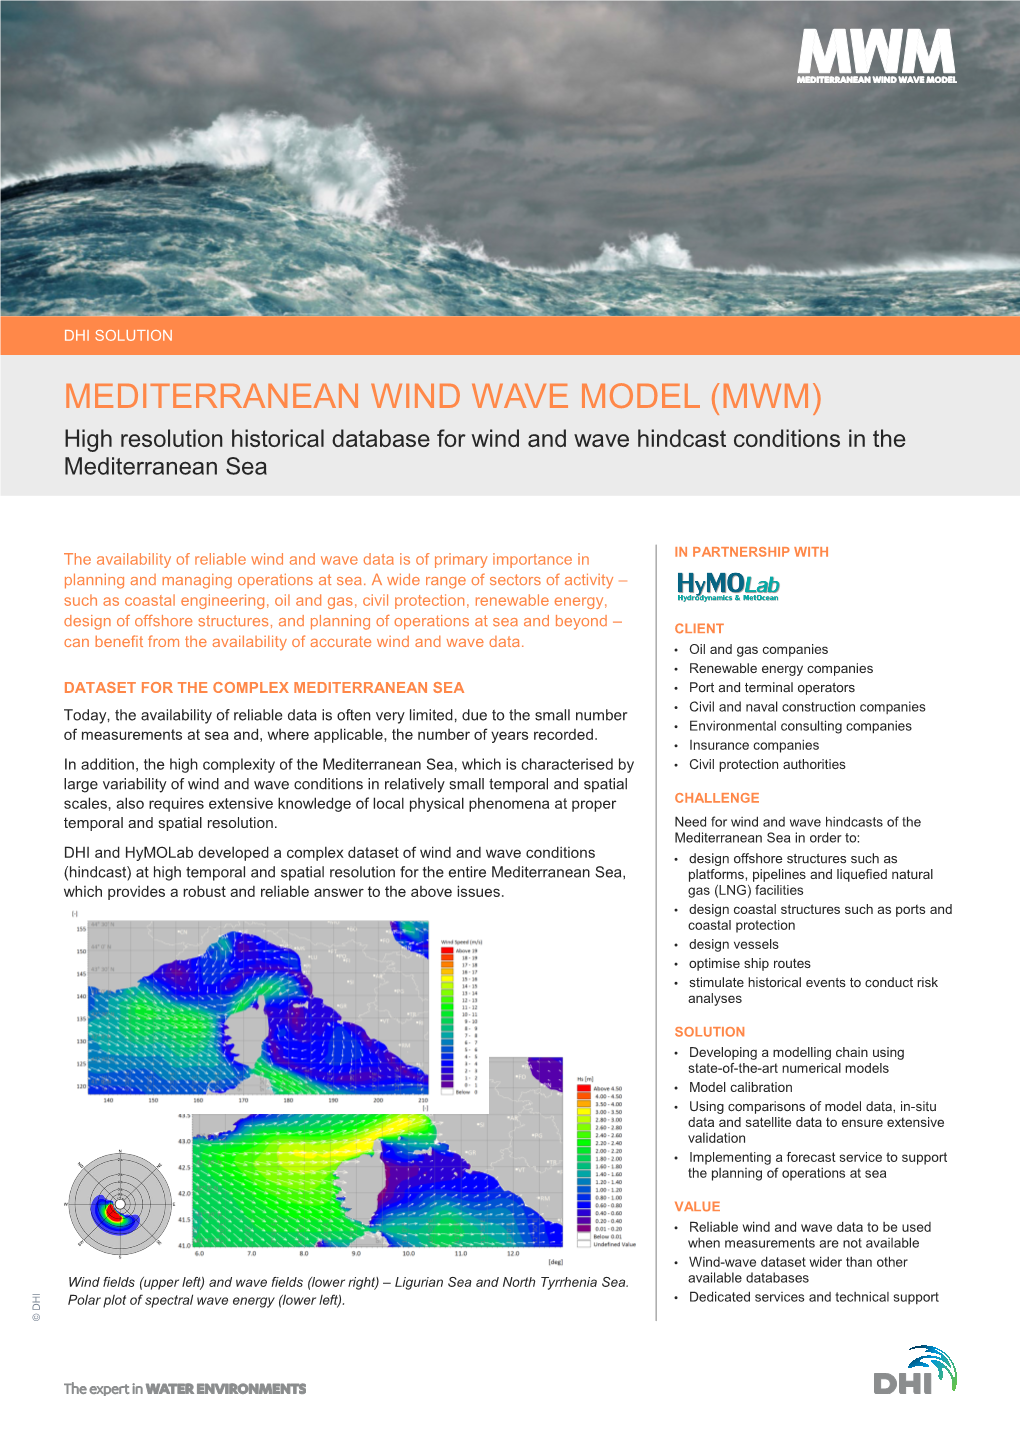 Mediterranean Wind Wave Model (MWM) Database Is the Result of Implementing a Modelling Chain That Combines Two State-Of-The-Art Models for Atmospheric Modelling